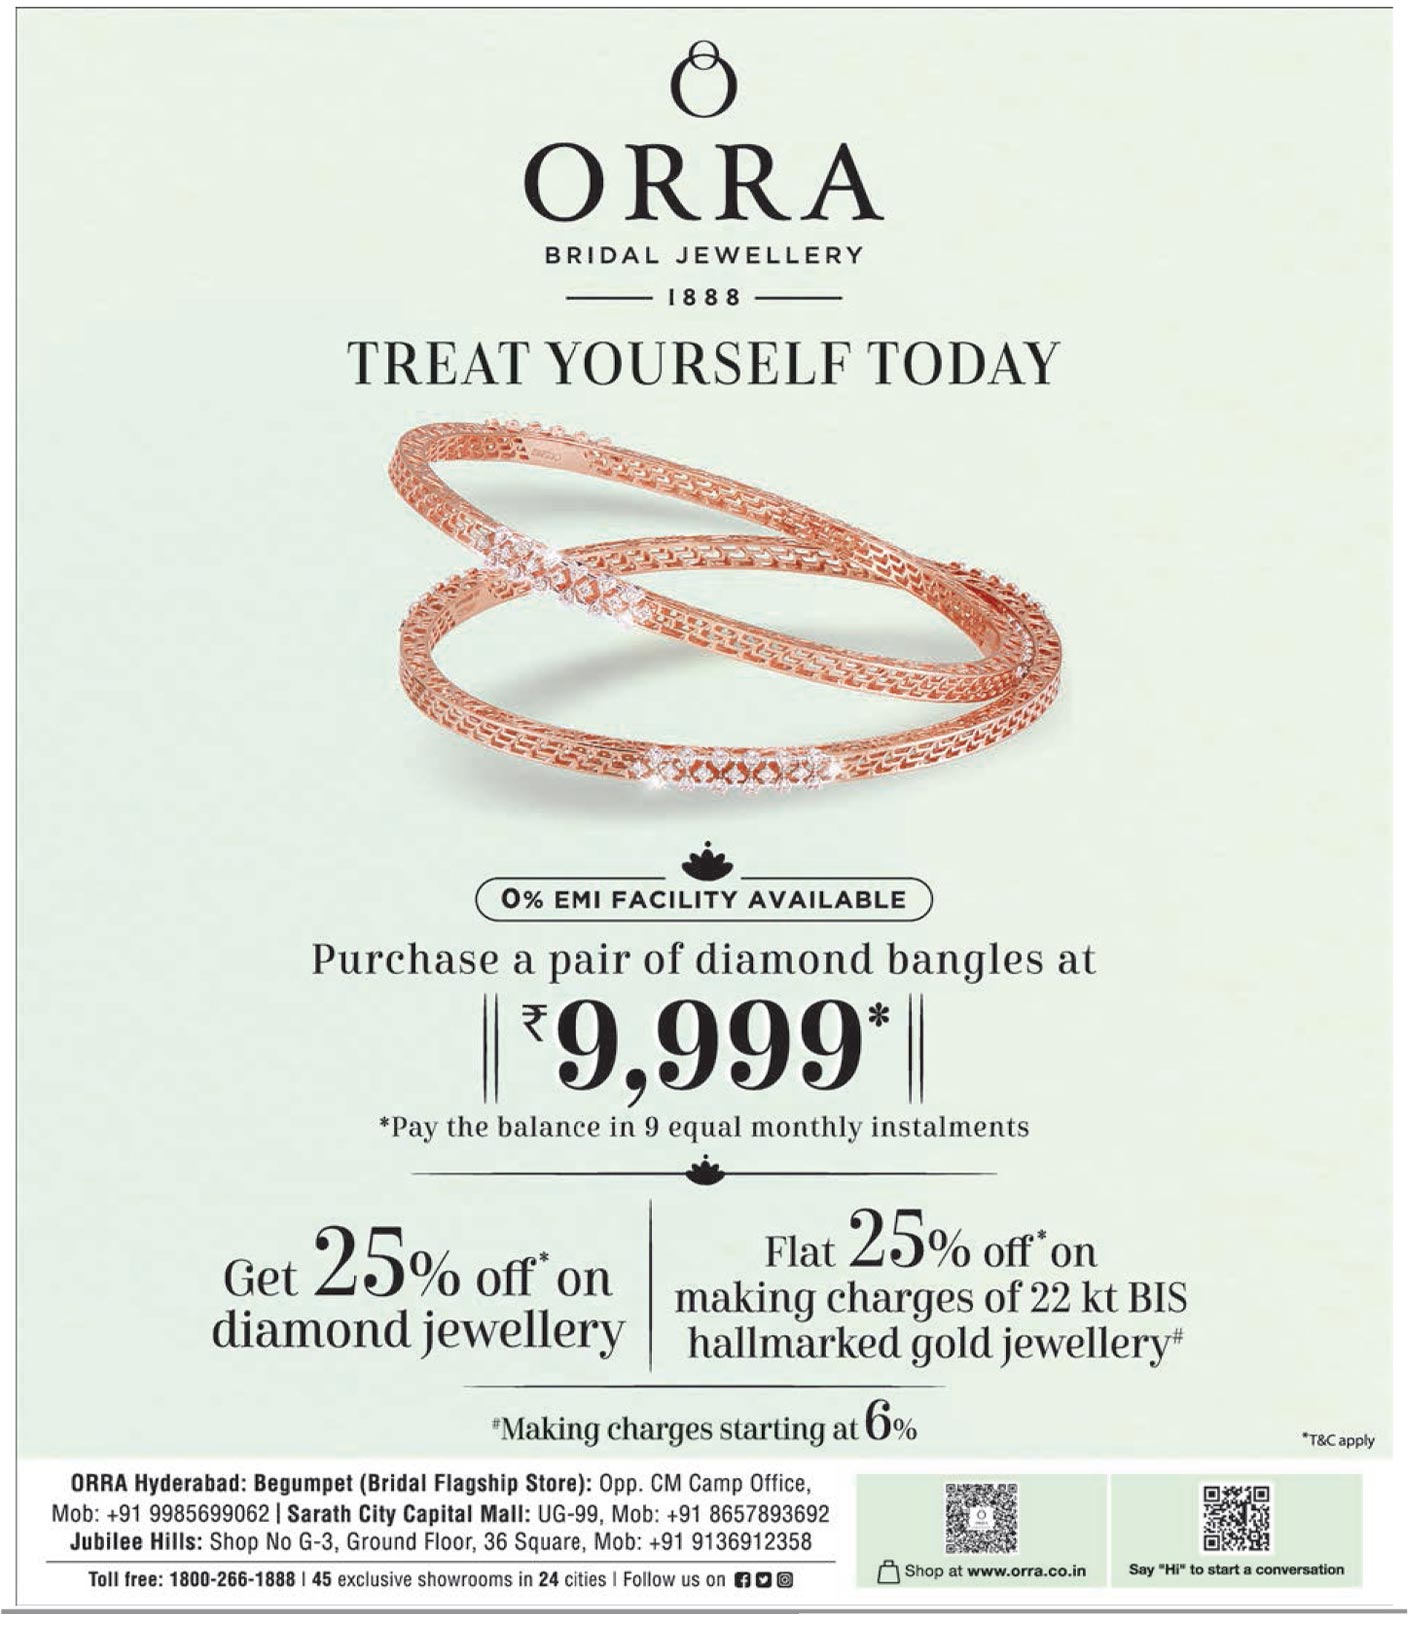 orra-bridal-jewellery-1888-treat-yourself-today-ad-deccan-chroncile-hyderabad-19-06-2021